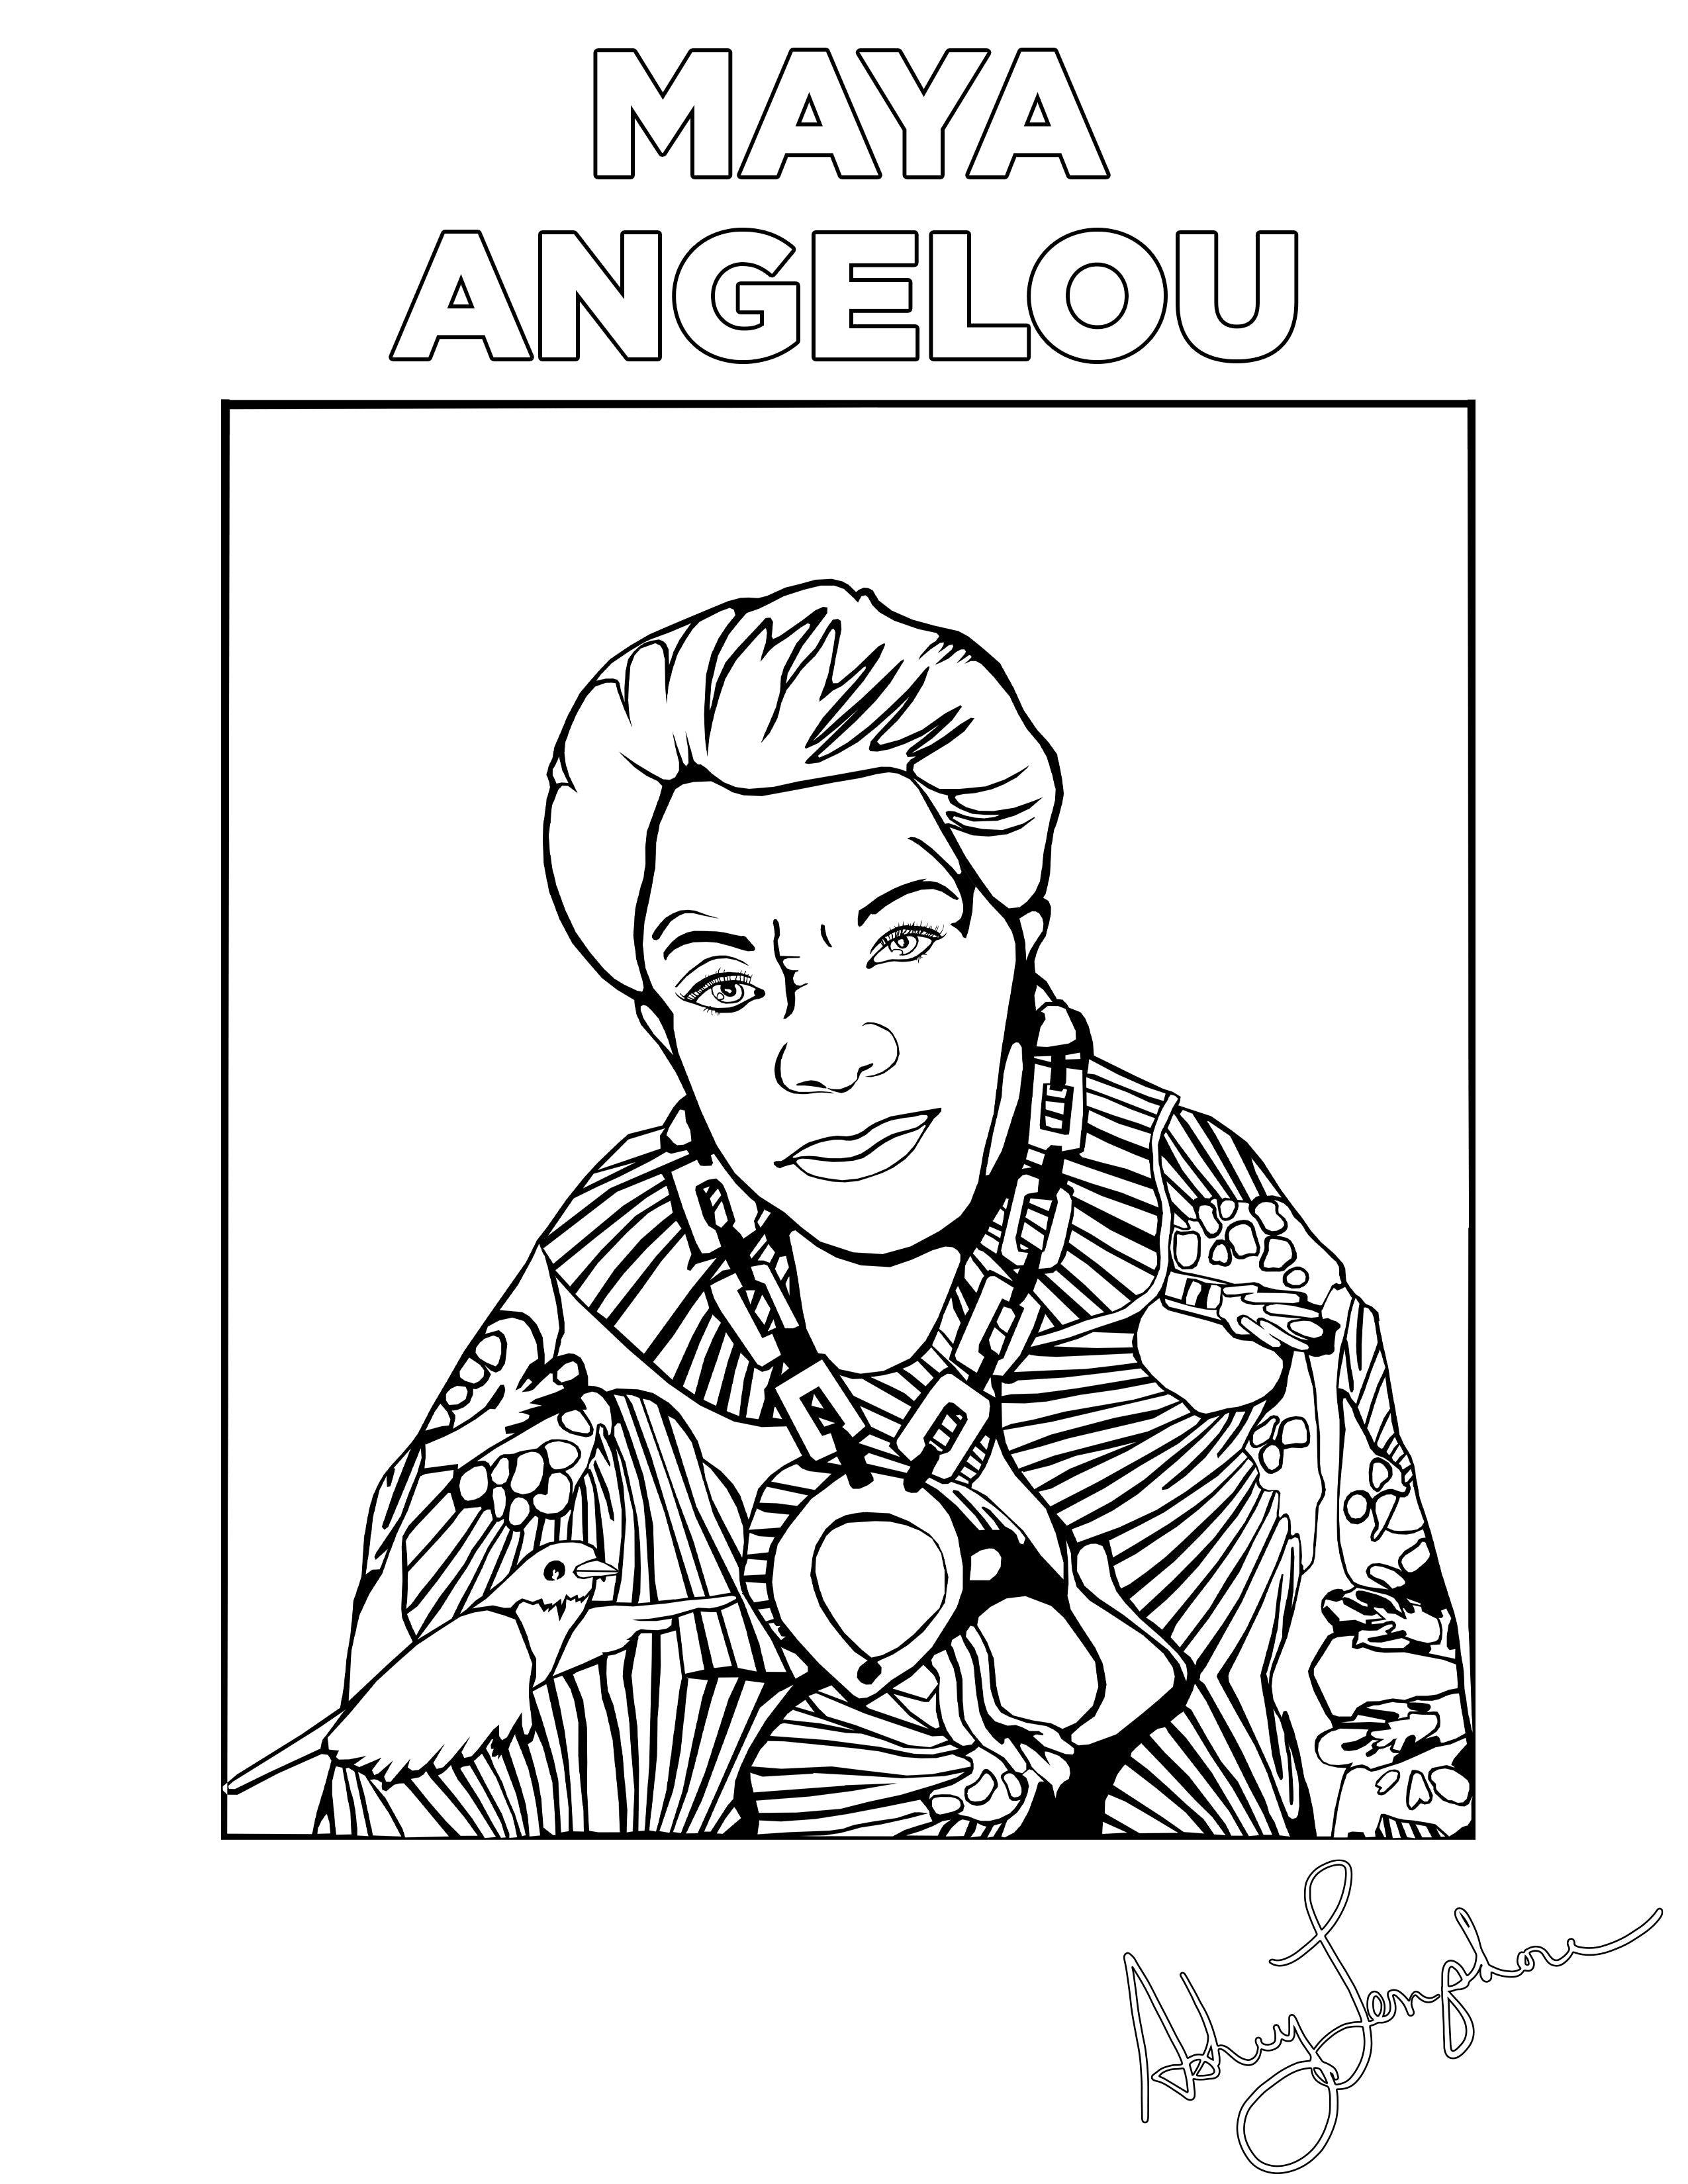 Ashley Longshore coloring pages featuring Maya Angelou.